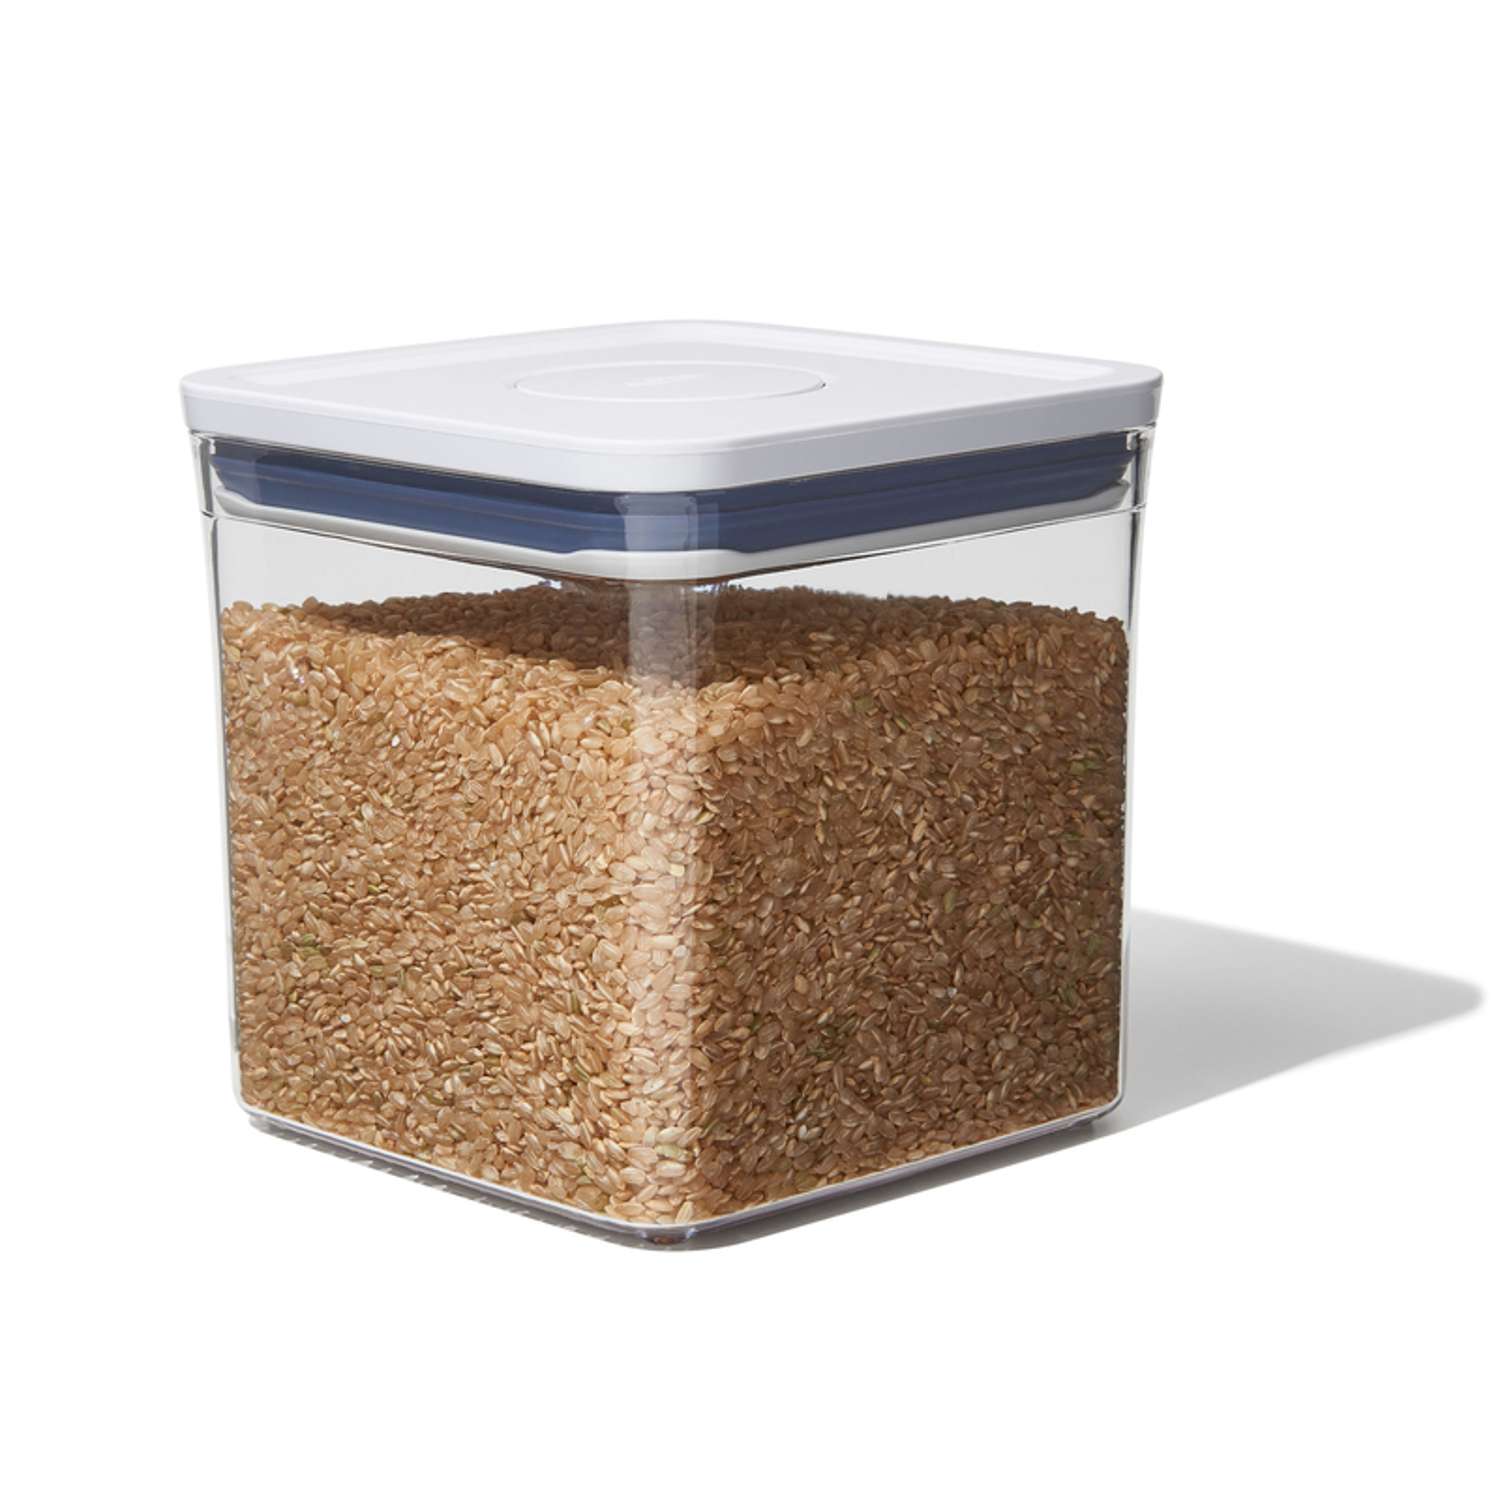 Are OXO Pop Containers Worth It?